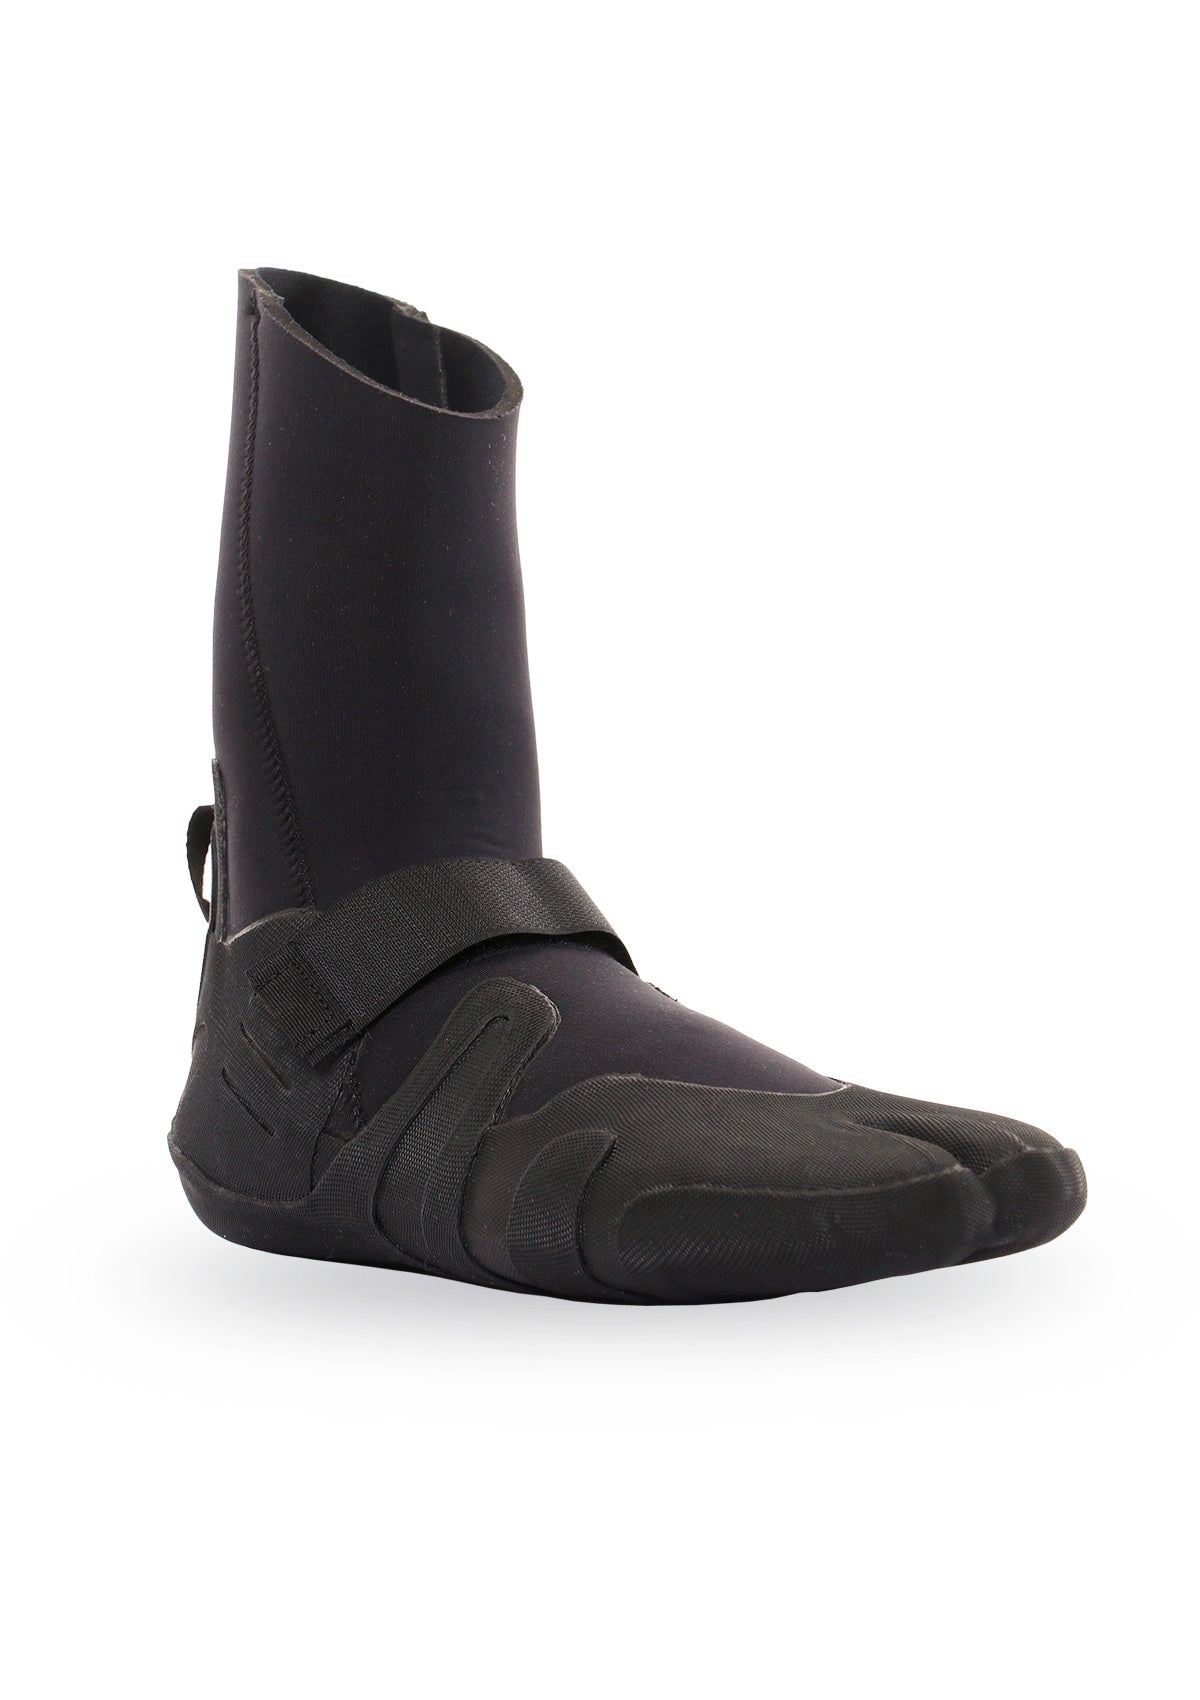 needessentials 4mm booties winter surfing black non branded coldwater